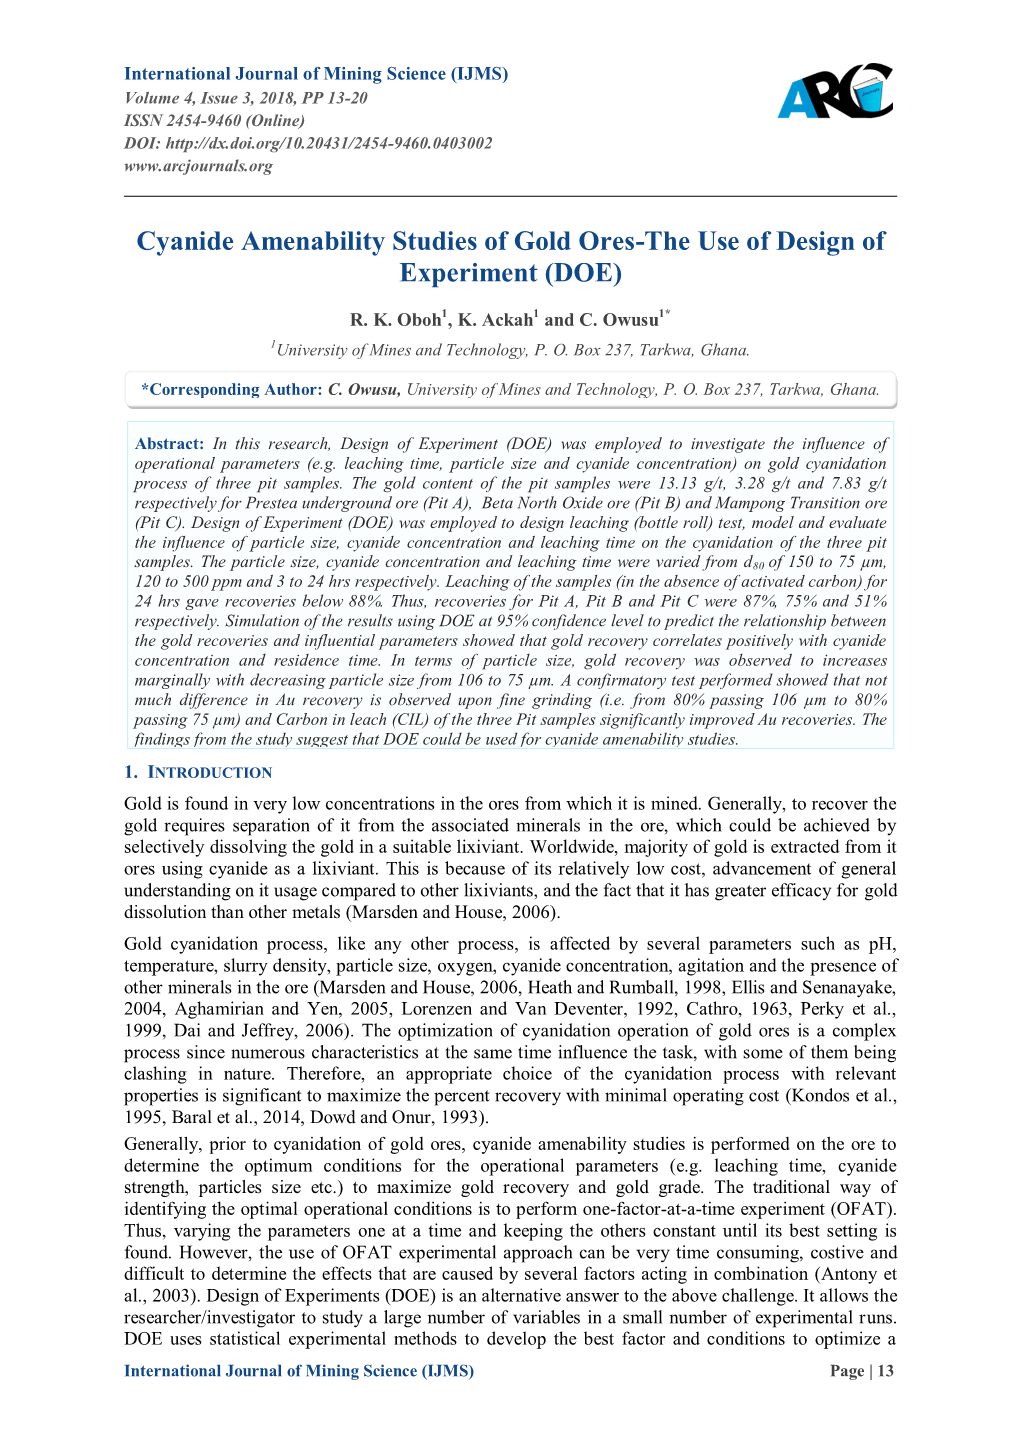 Cyanide Amenability Studies of Gold Ores-The Use of Design of Experiment (DOE)